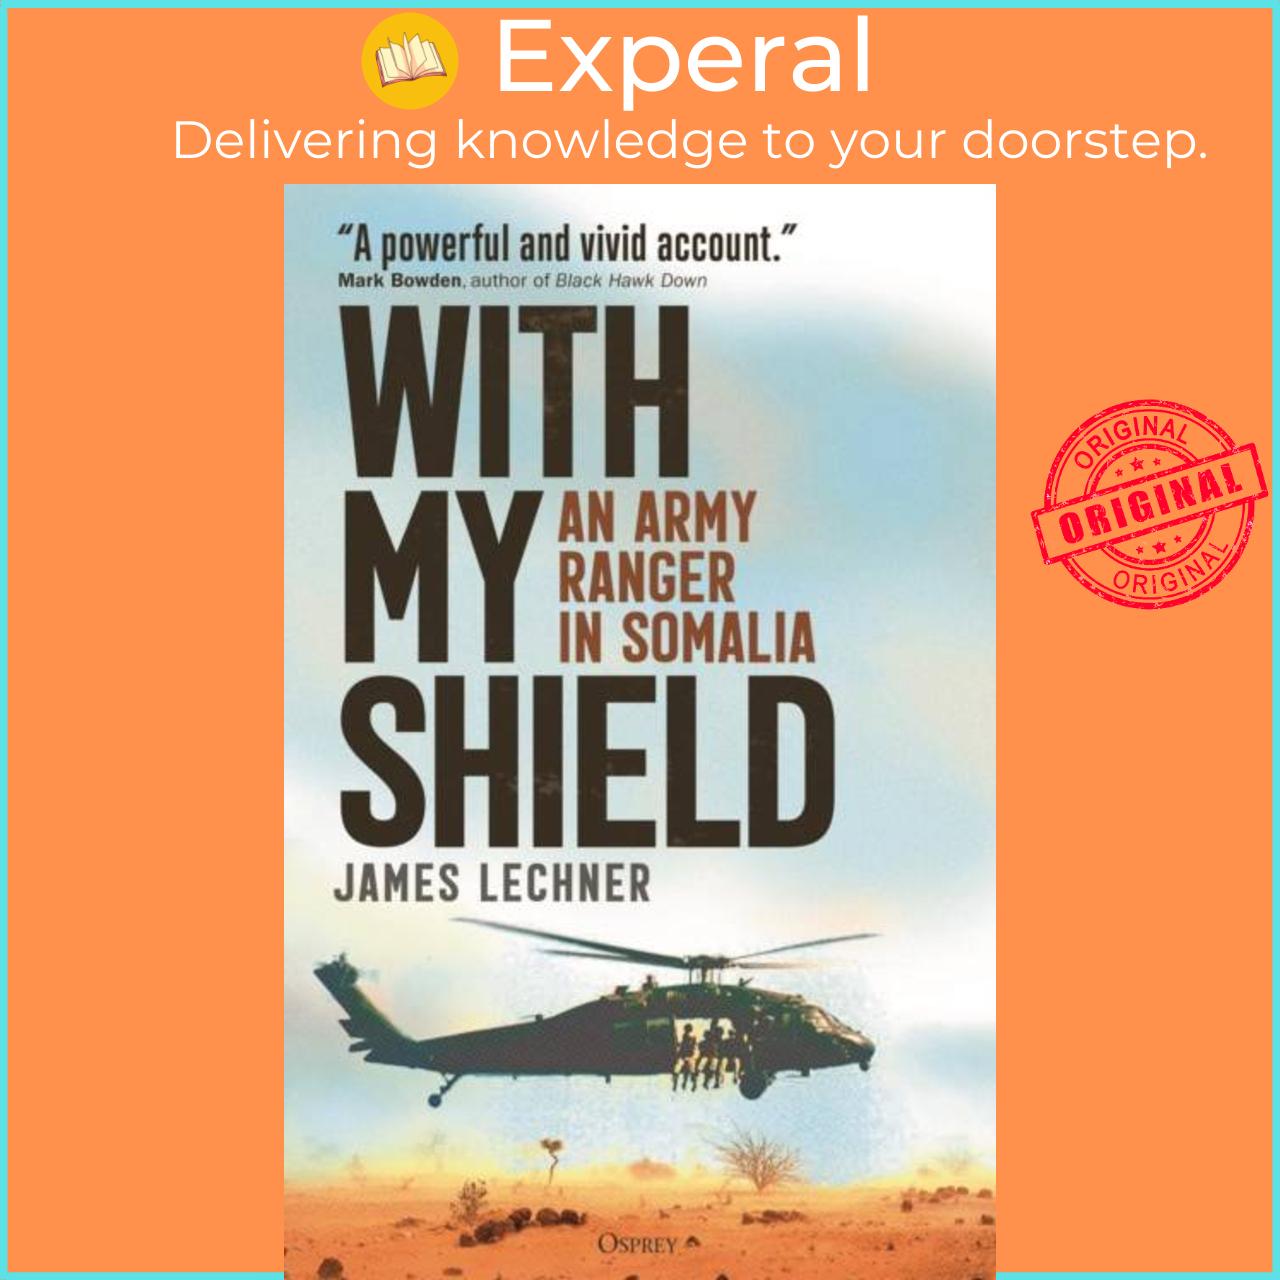 Sách - With My Shield - An Army Ranger in Somalia by James Lechner (UK edition, hardcover)